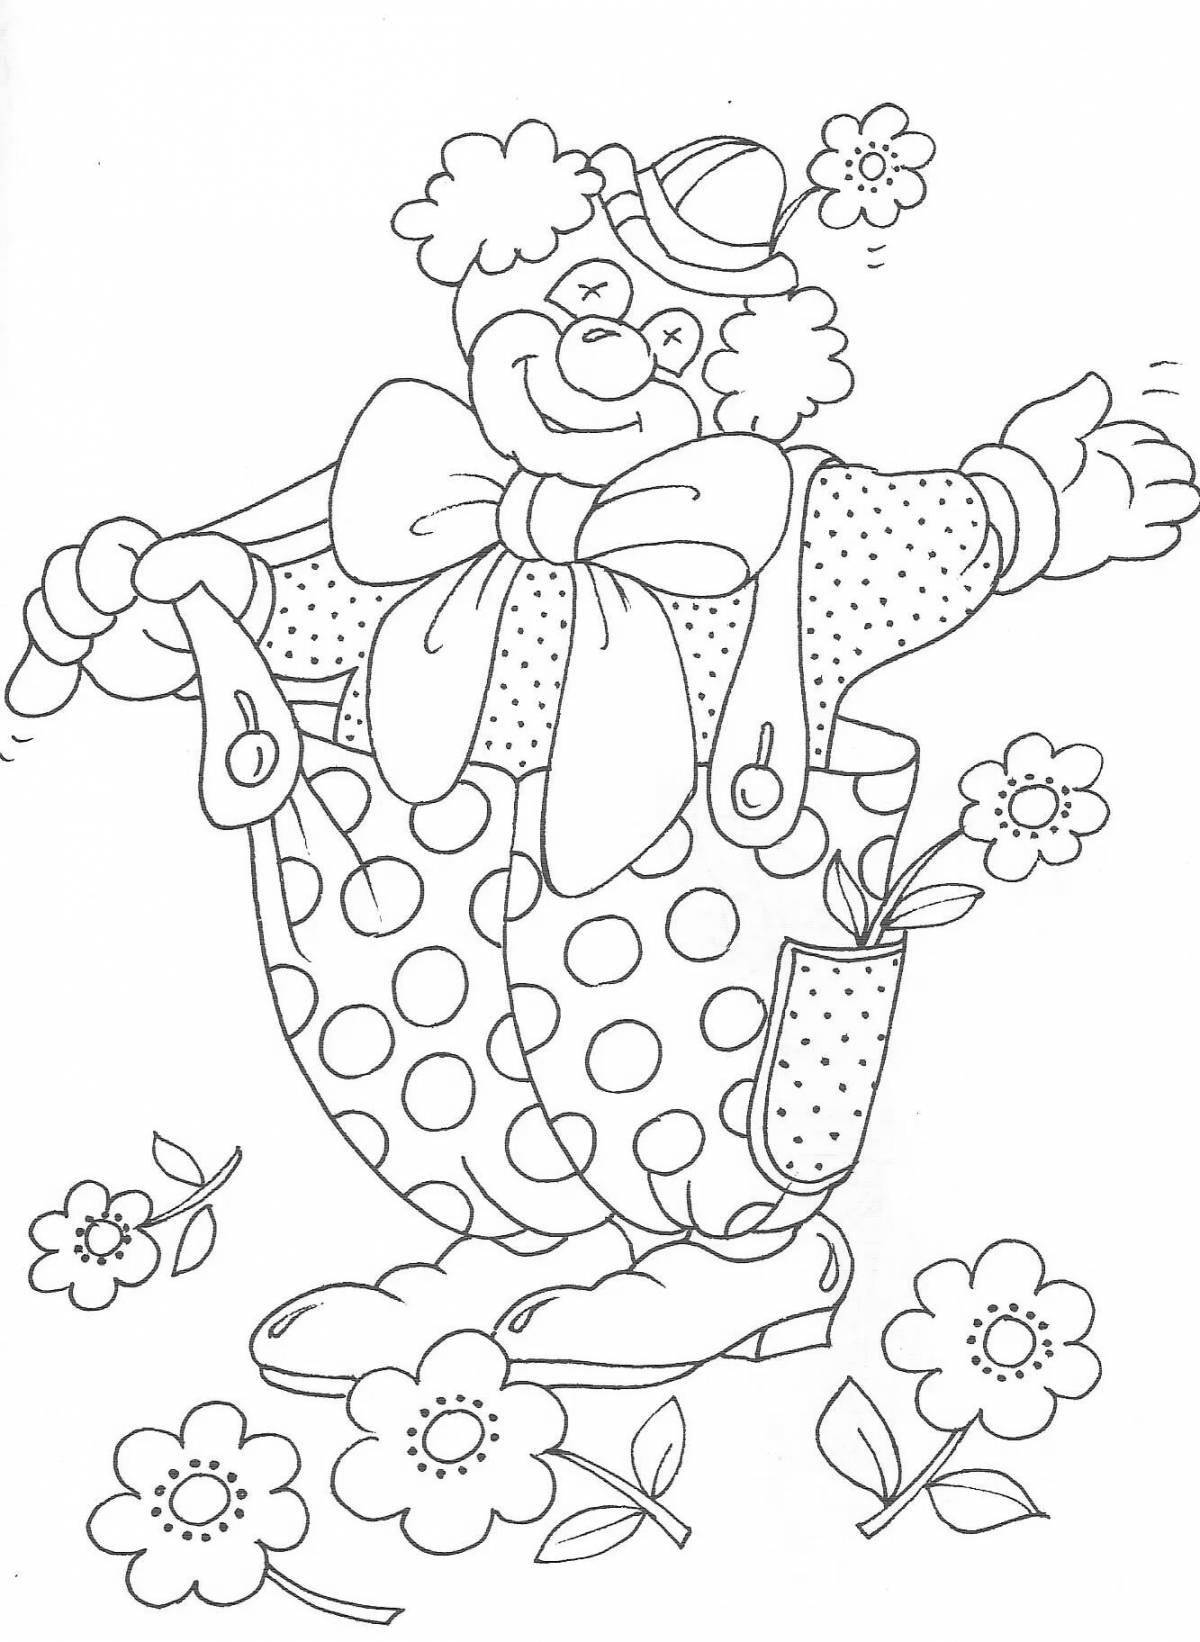 Coloring funny funny clown for kids